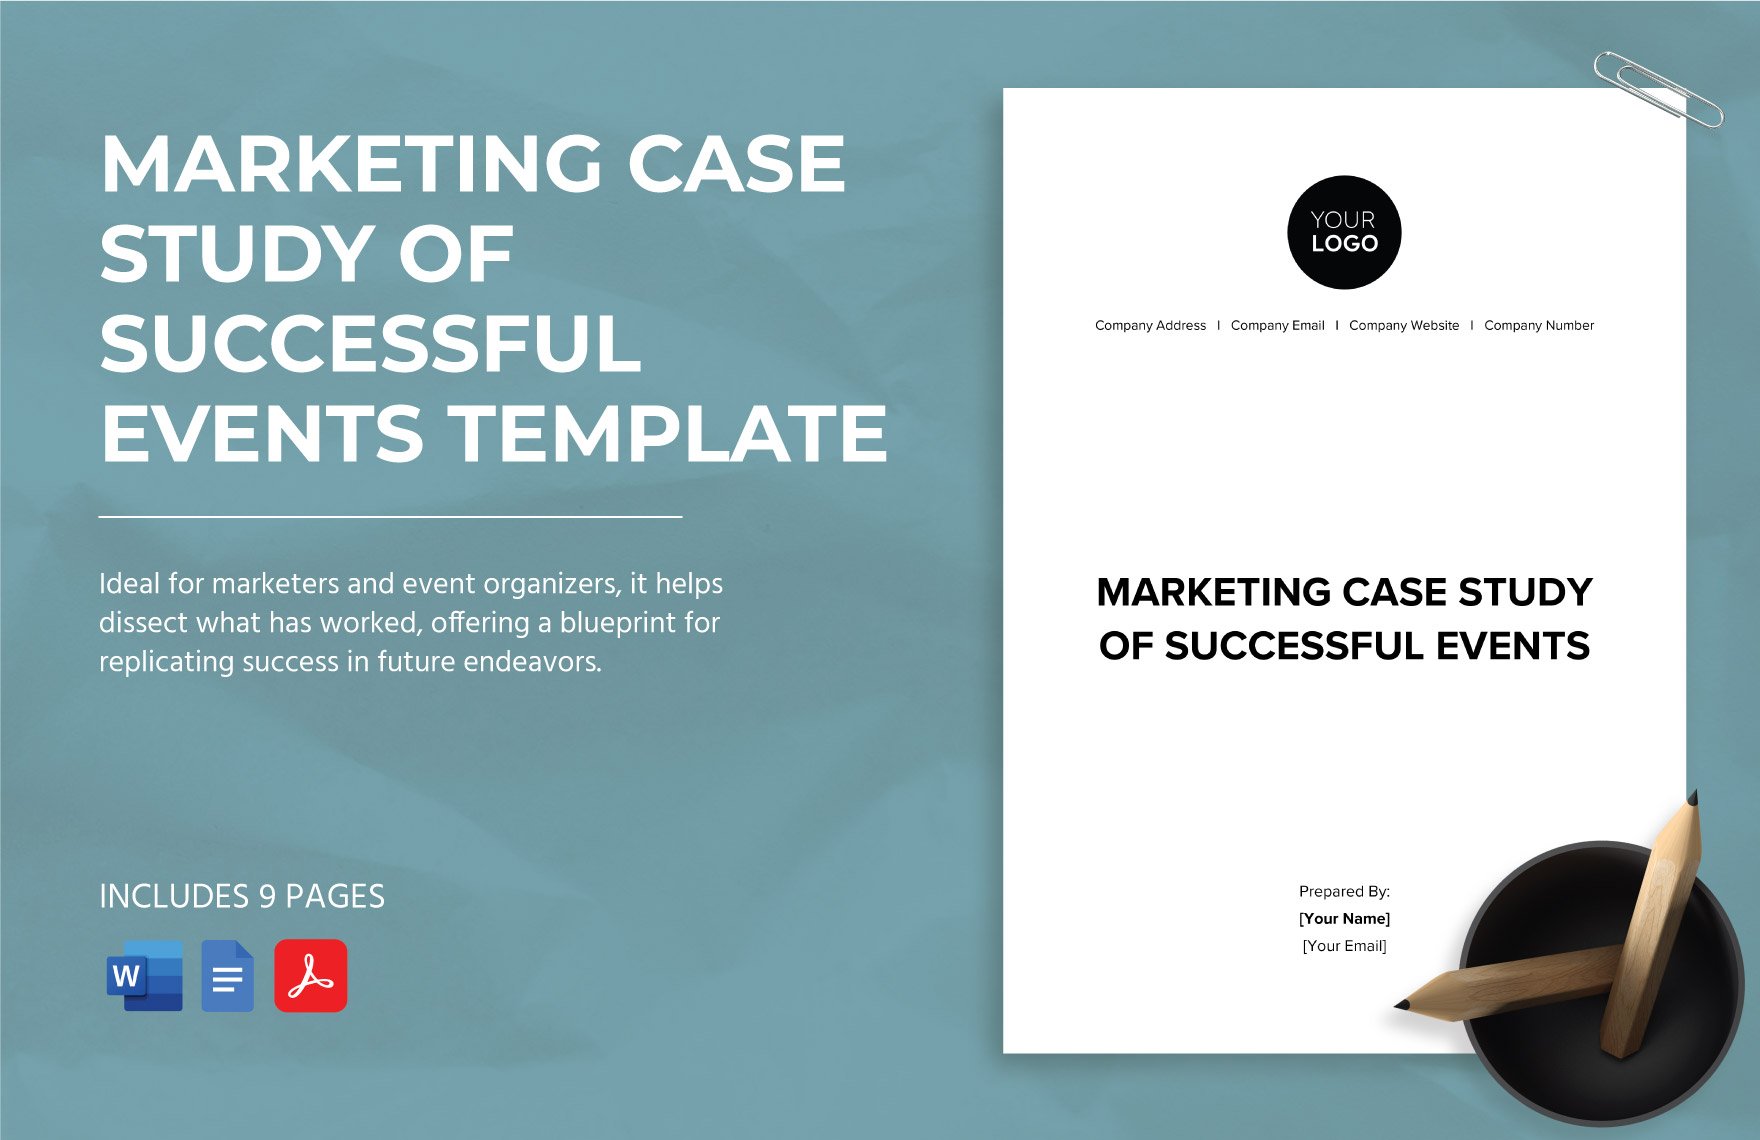 Marketing Case Study of Successful Events Template